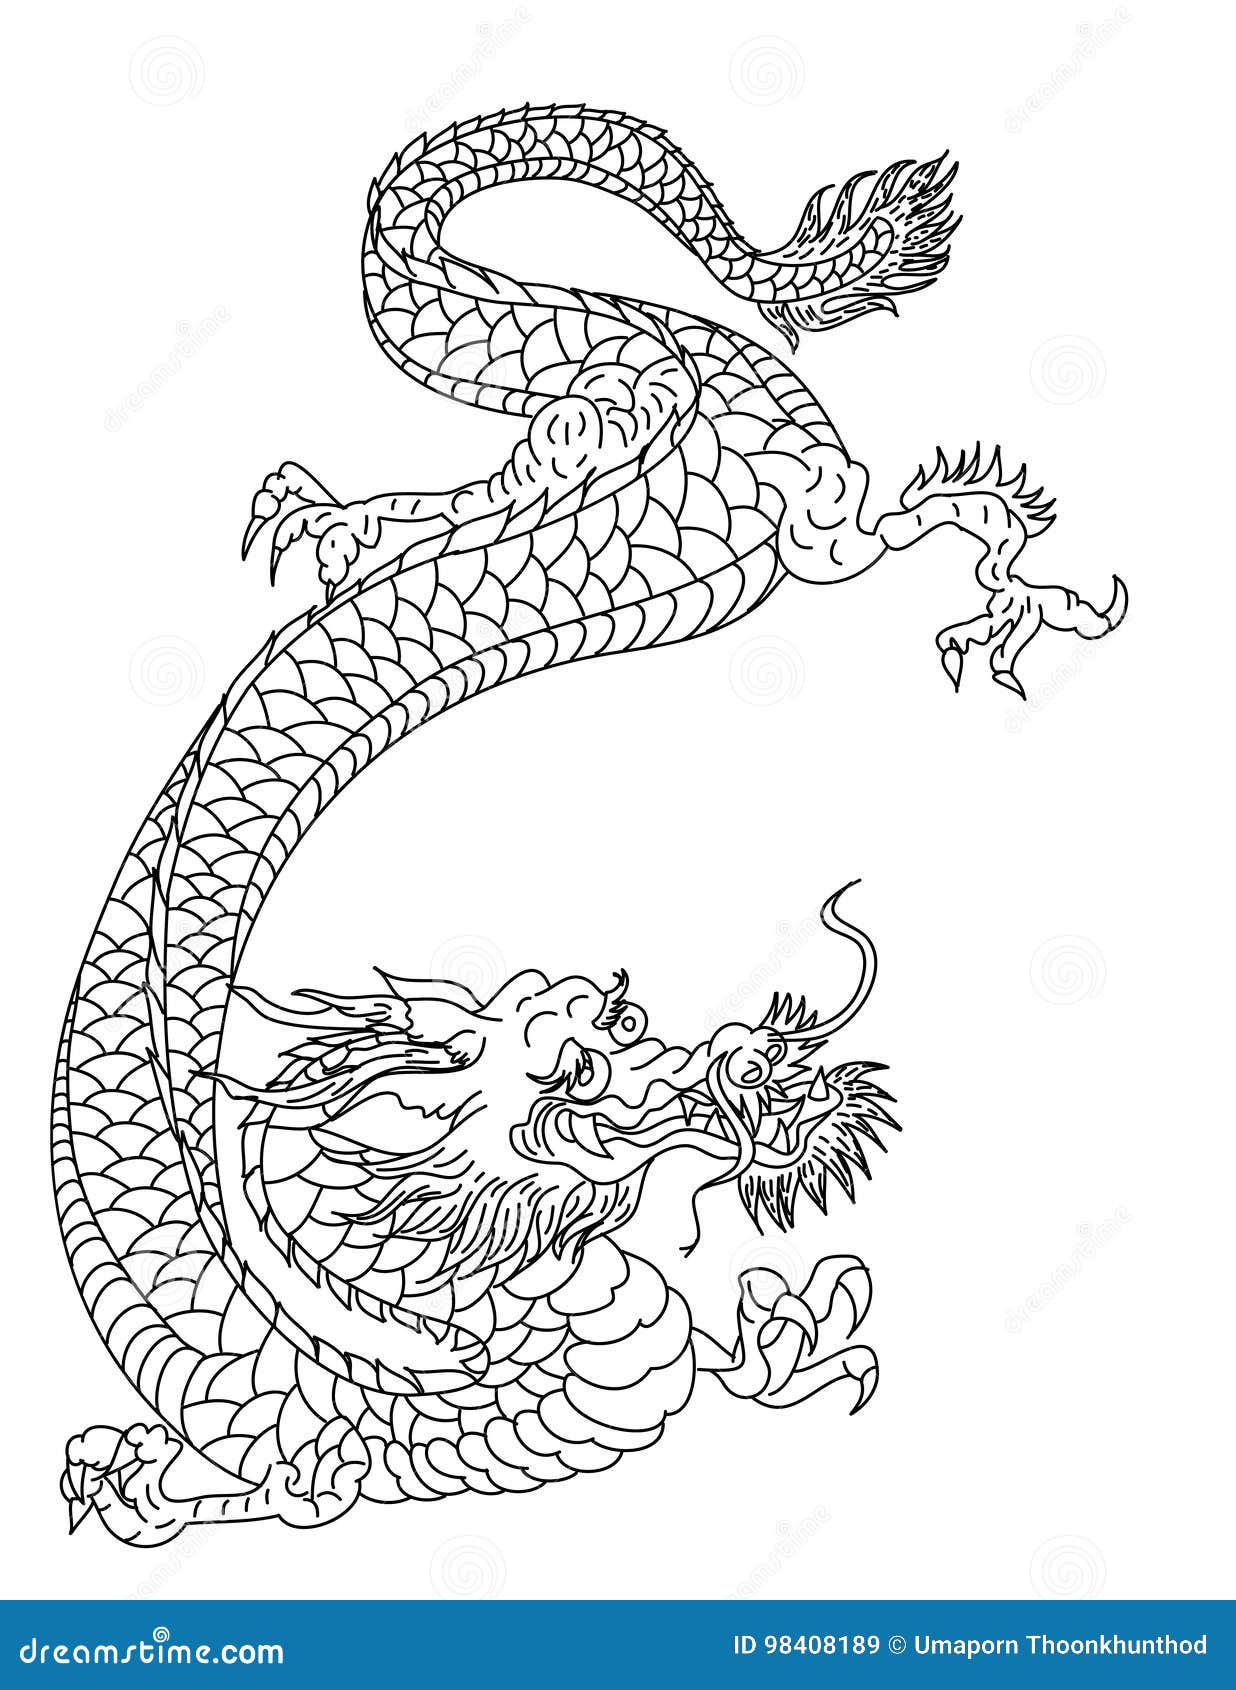 Awesome Blue Chinese Dragon Tattoo Design